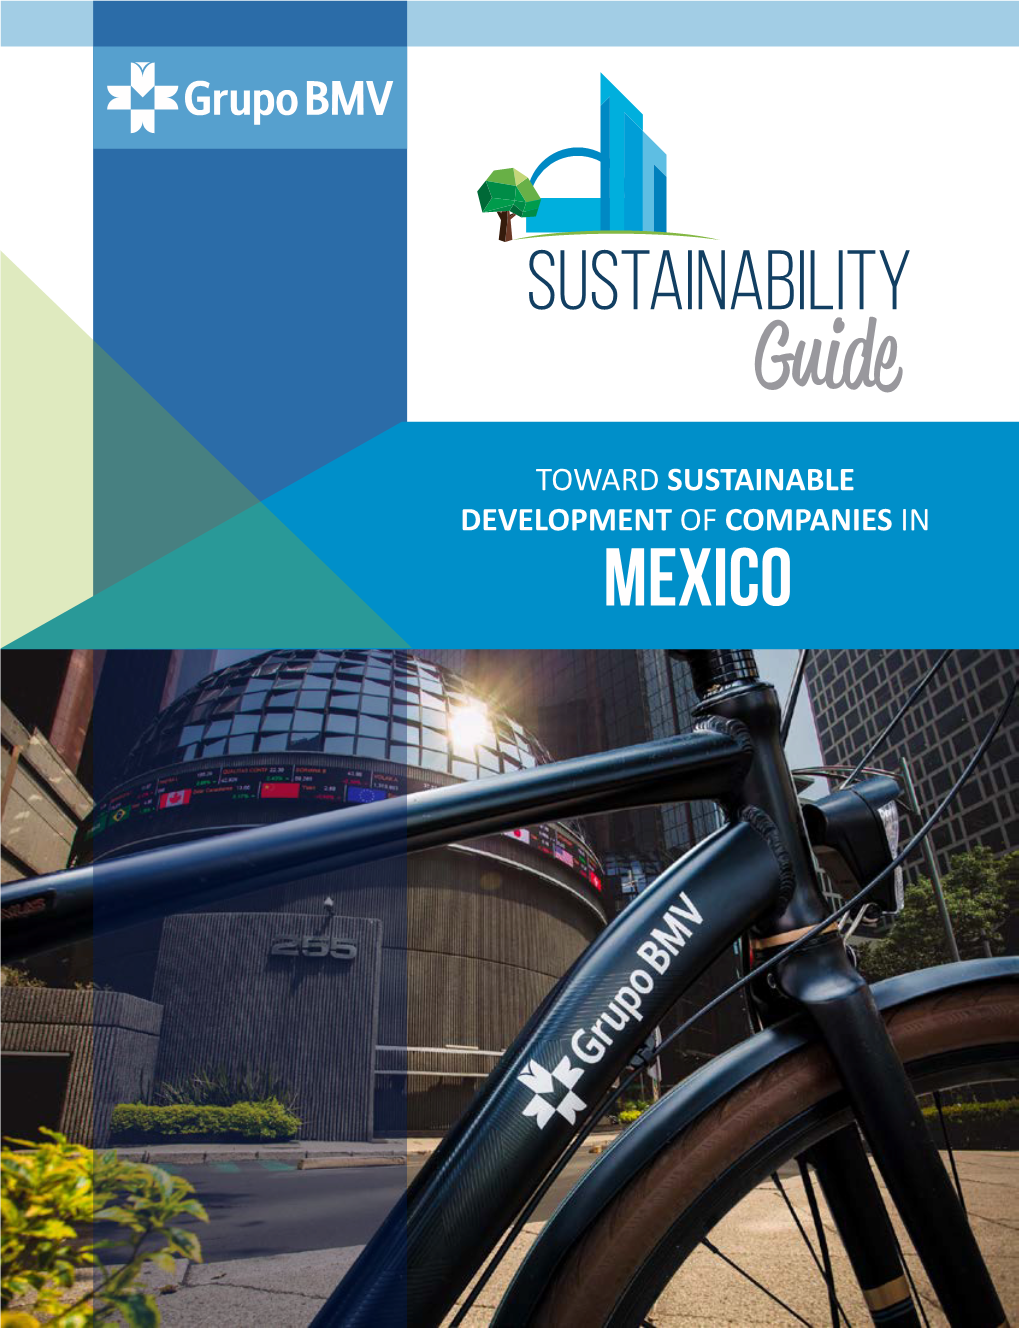 SUSTAINABILITY Guide